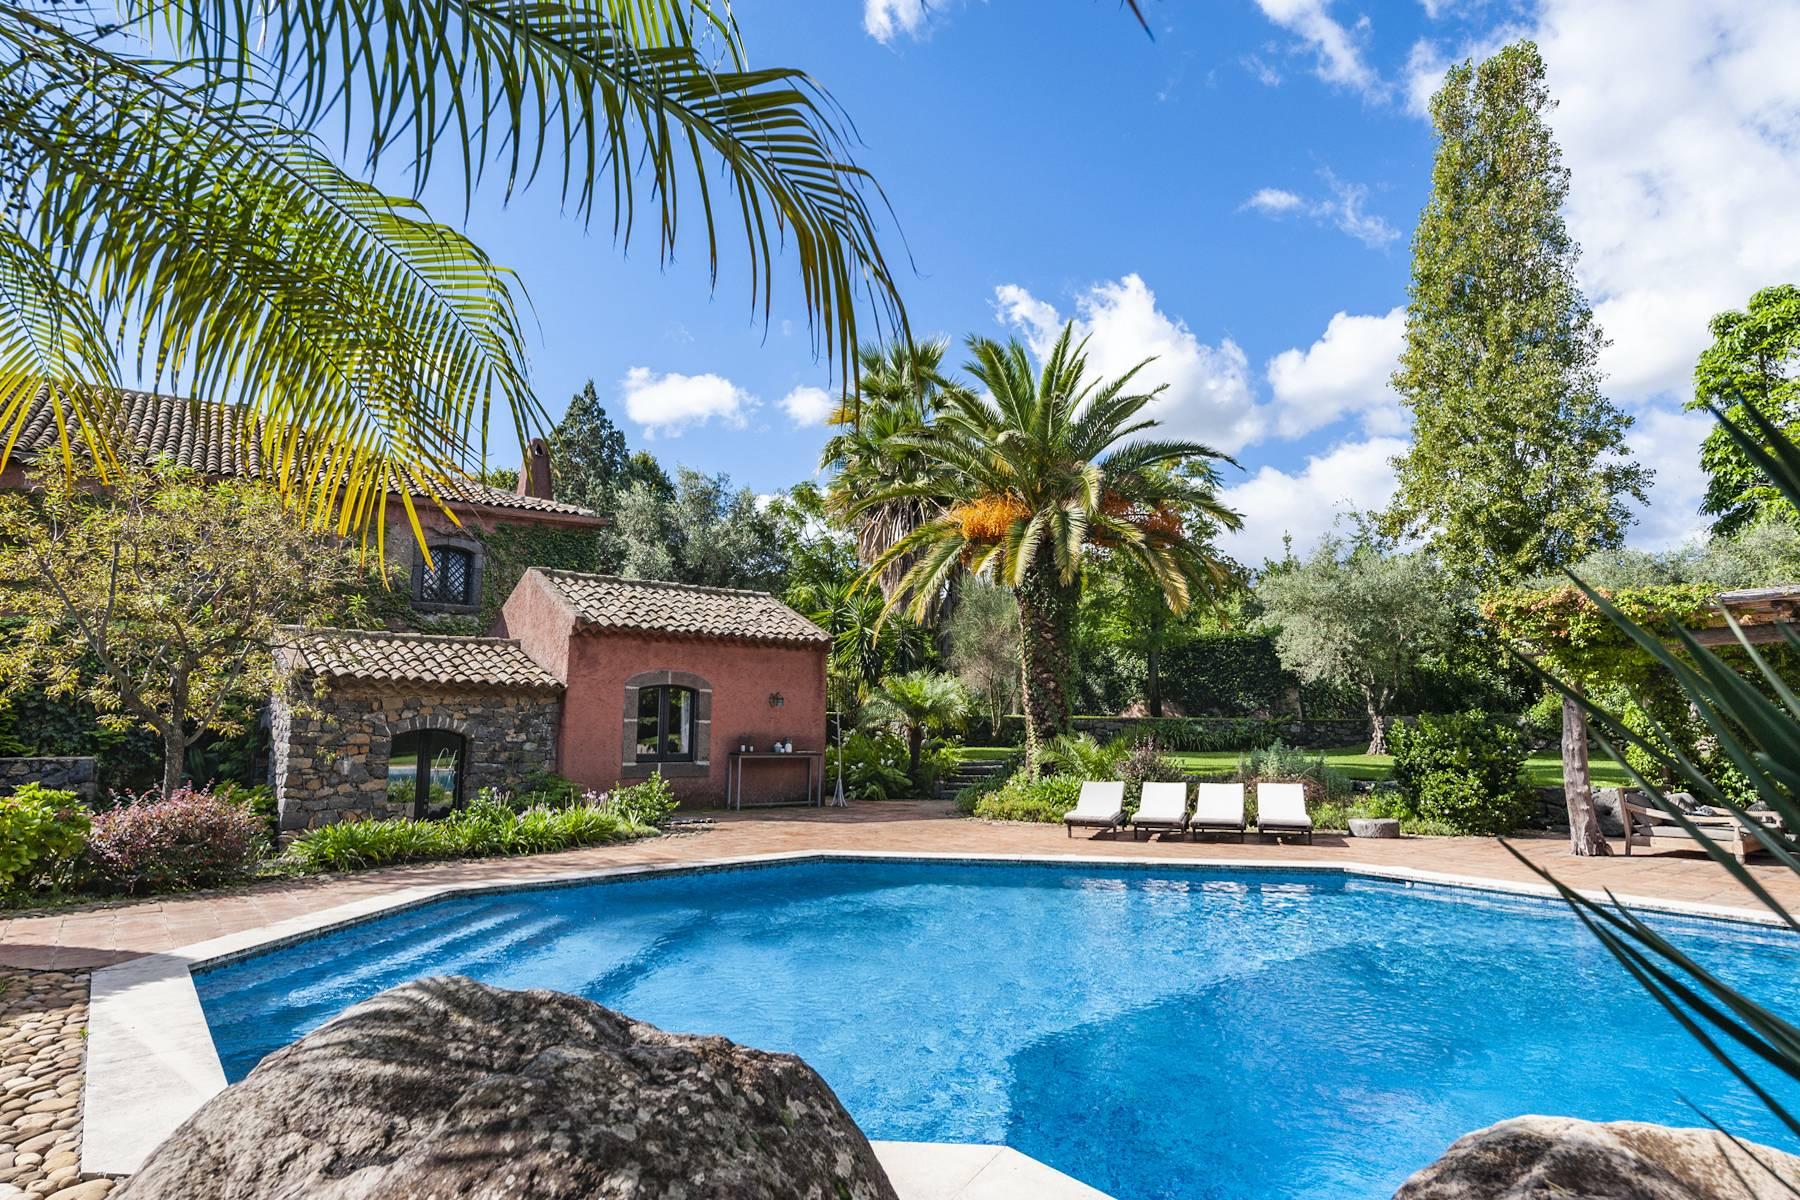 Prestigious residence with swimming pool on the slopes of Etna overlooking the Ionian Sea and the volcano - 41